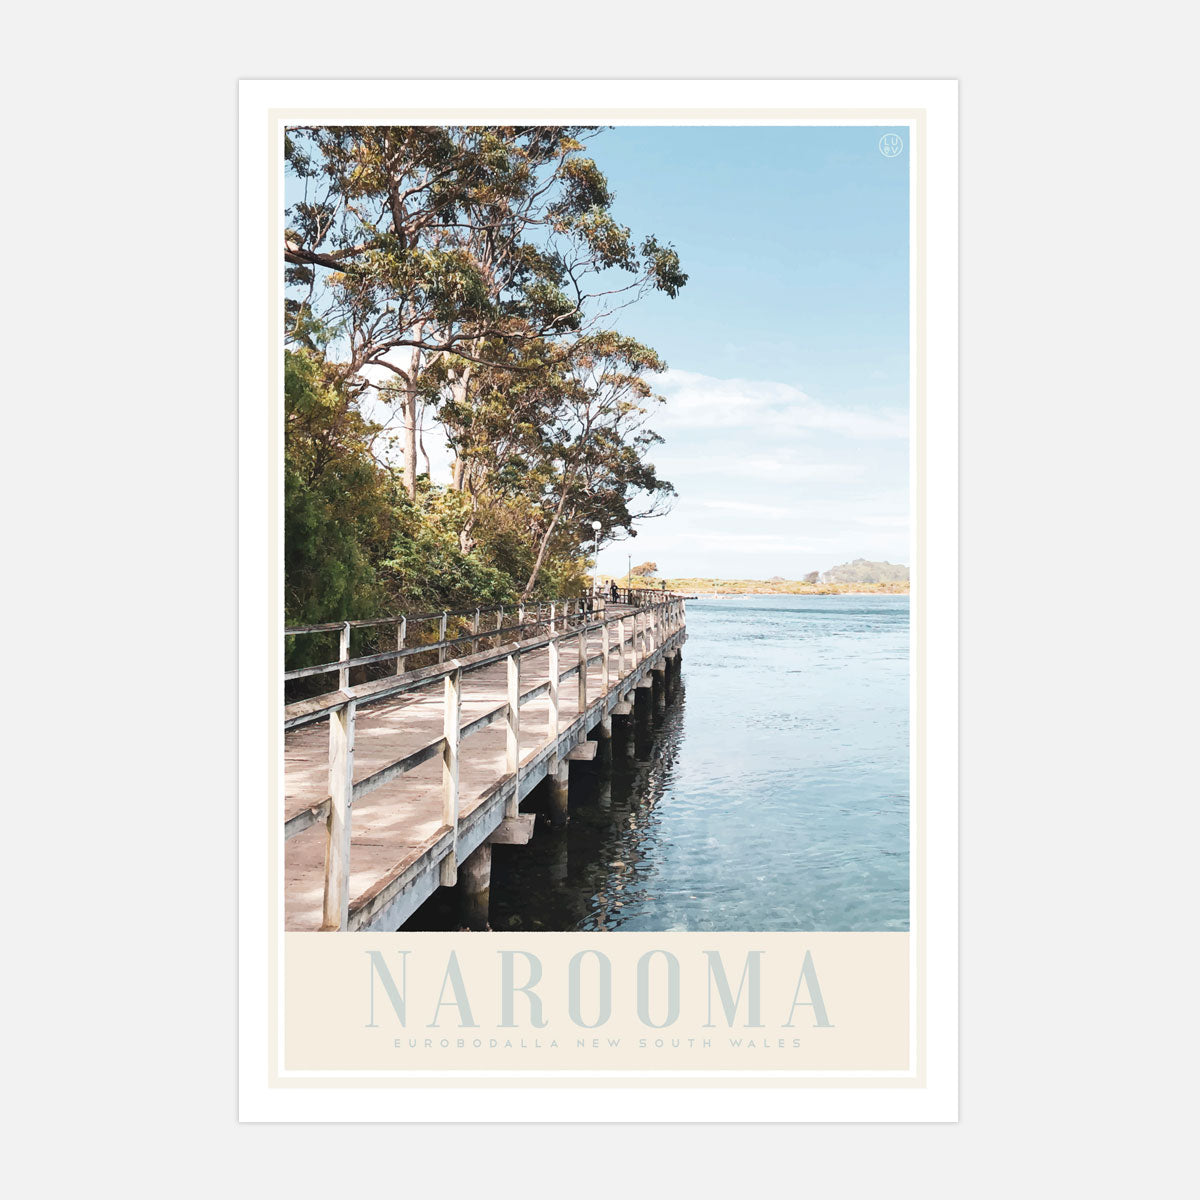 Narooma vintage travel style print by places we luv